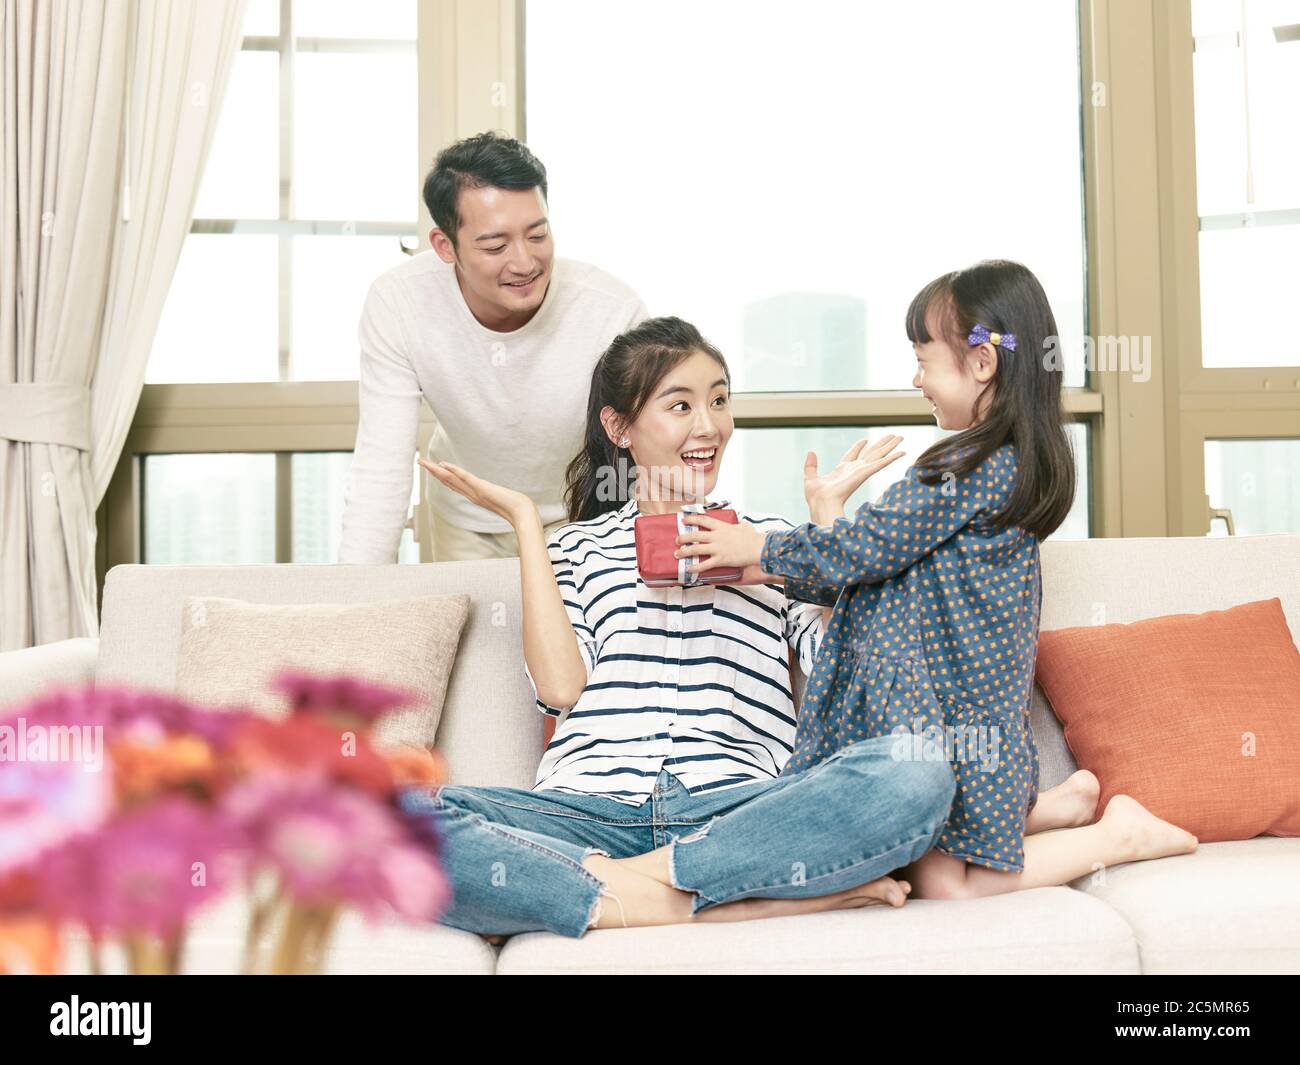 young asian woman receiving a gift from daughter on mother's day Stock Photo